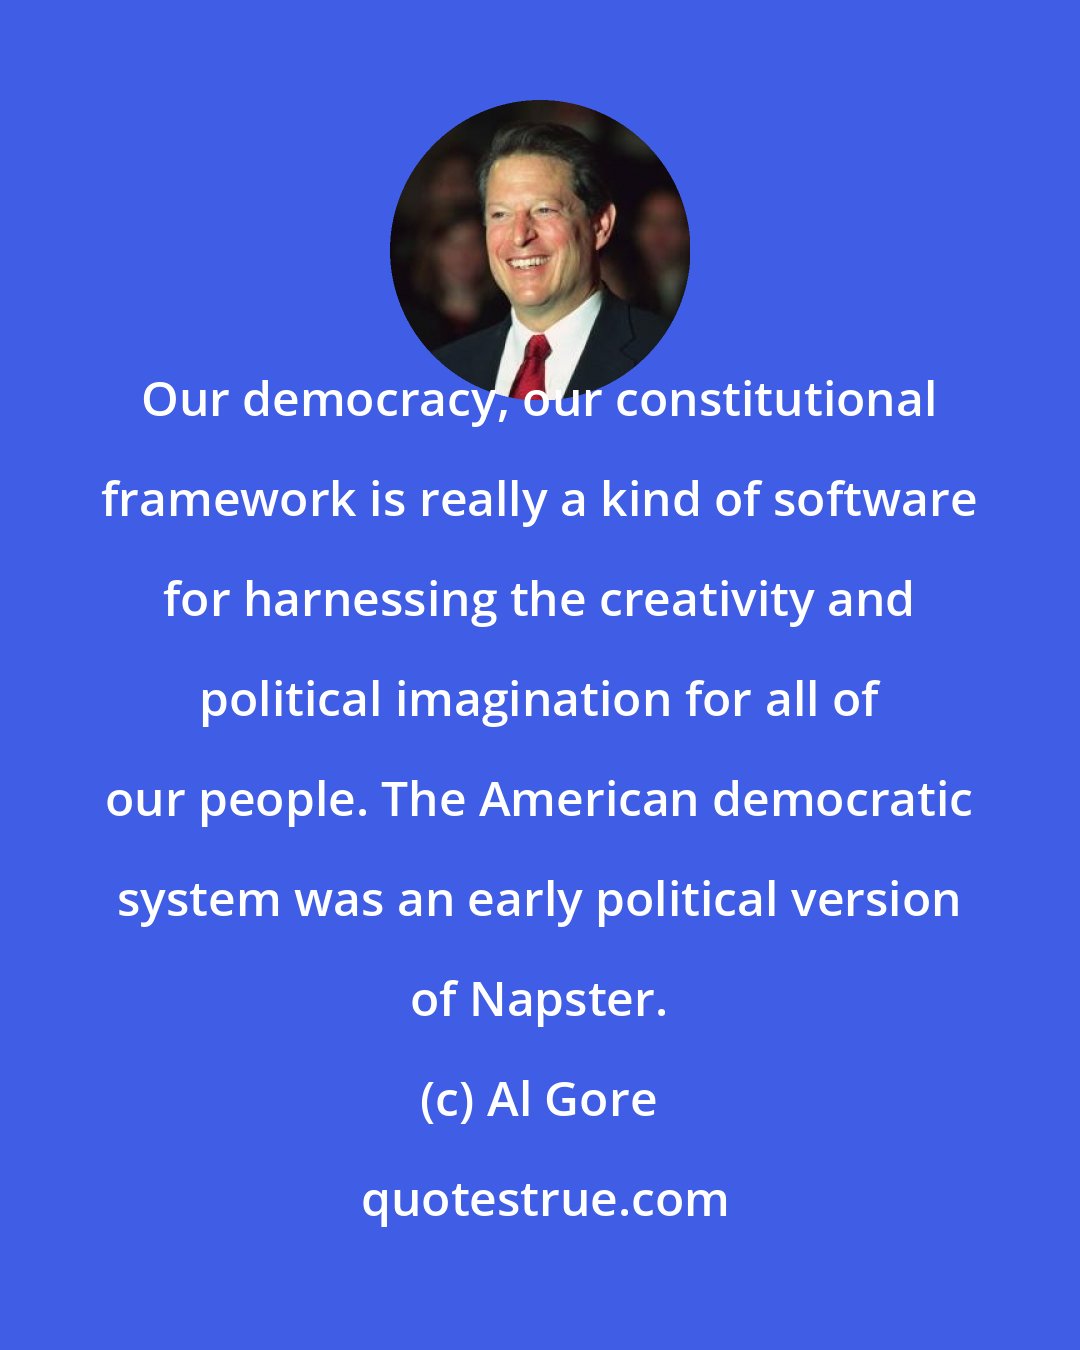 Al Gore: Our democracy, our constitutional framework is really a kind of software for harnessing the creativity and political imagination for all of our people. The American democratic system was an early political version of Napster.